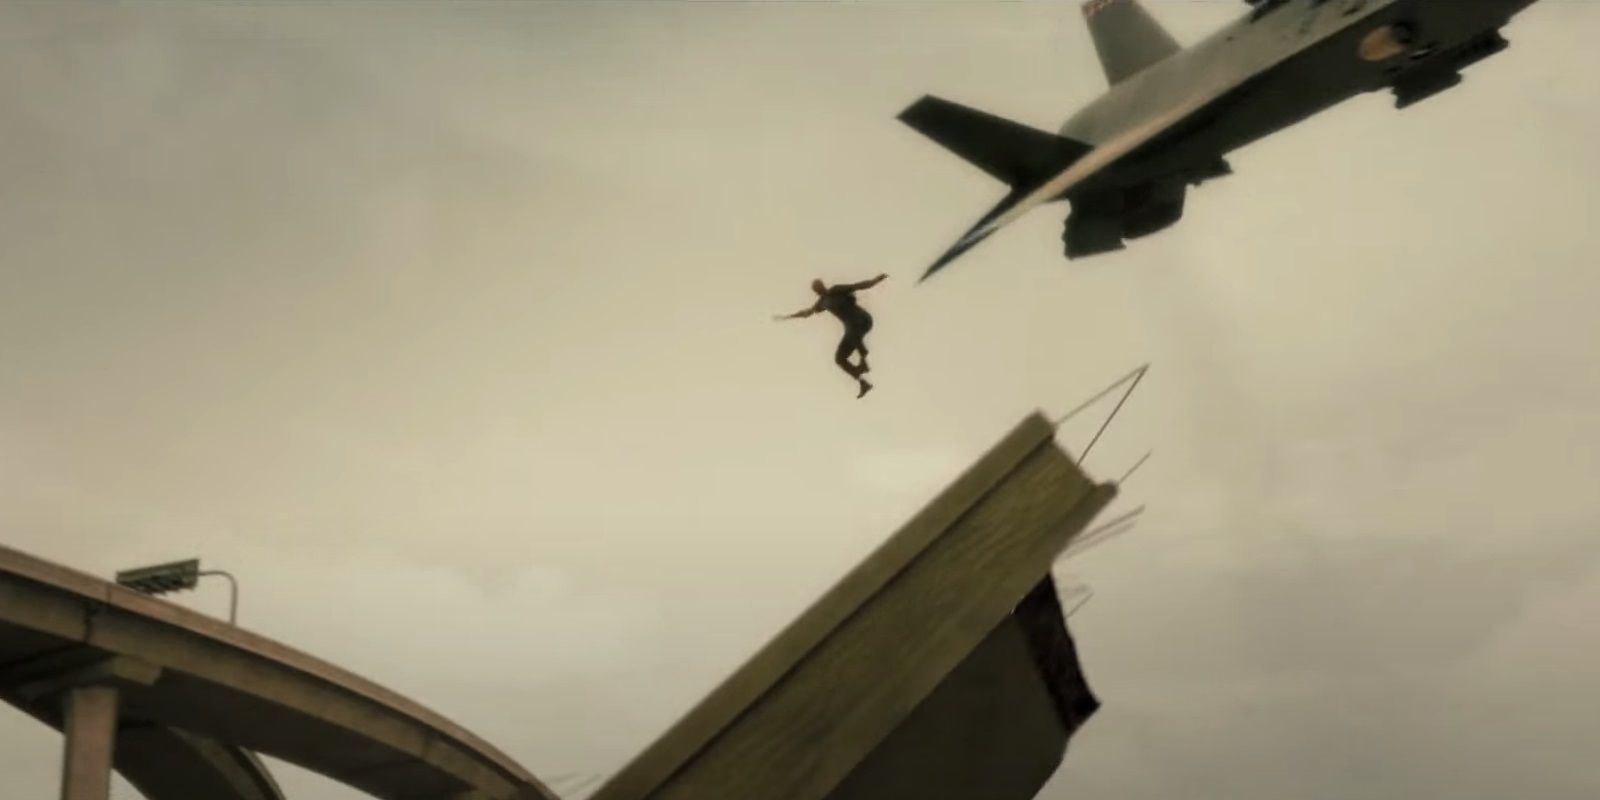 John McClane jumps off a fighter jet in Live Free or Die Hard